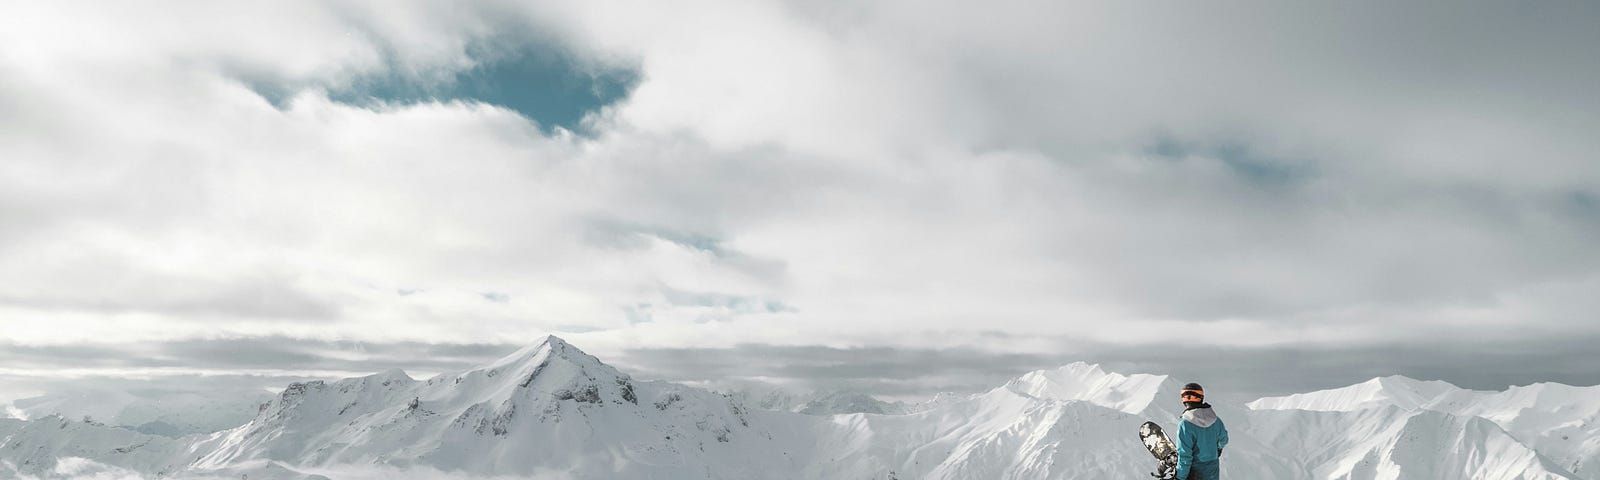 A snowboarder standing on a tall hill looking out at mountain peaks.